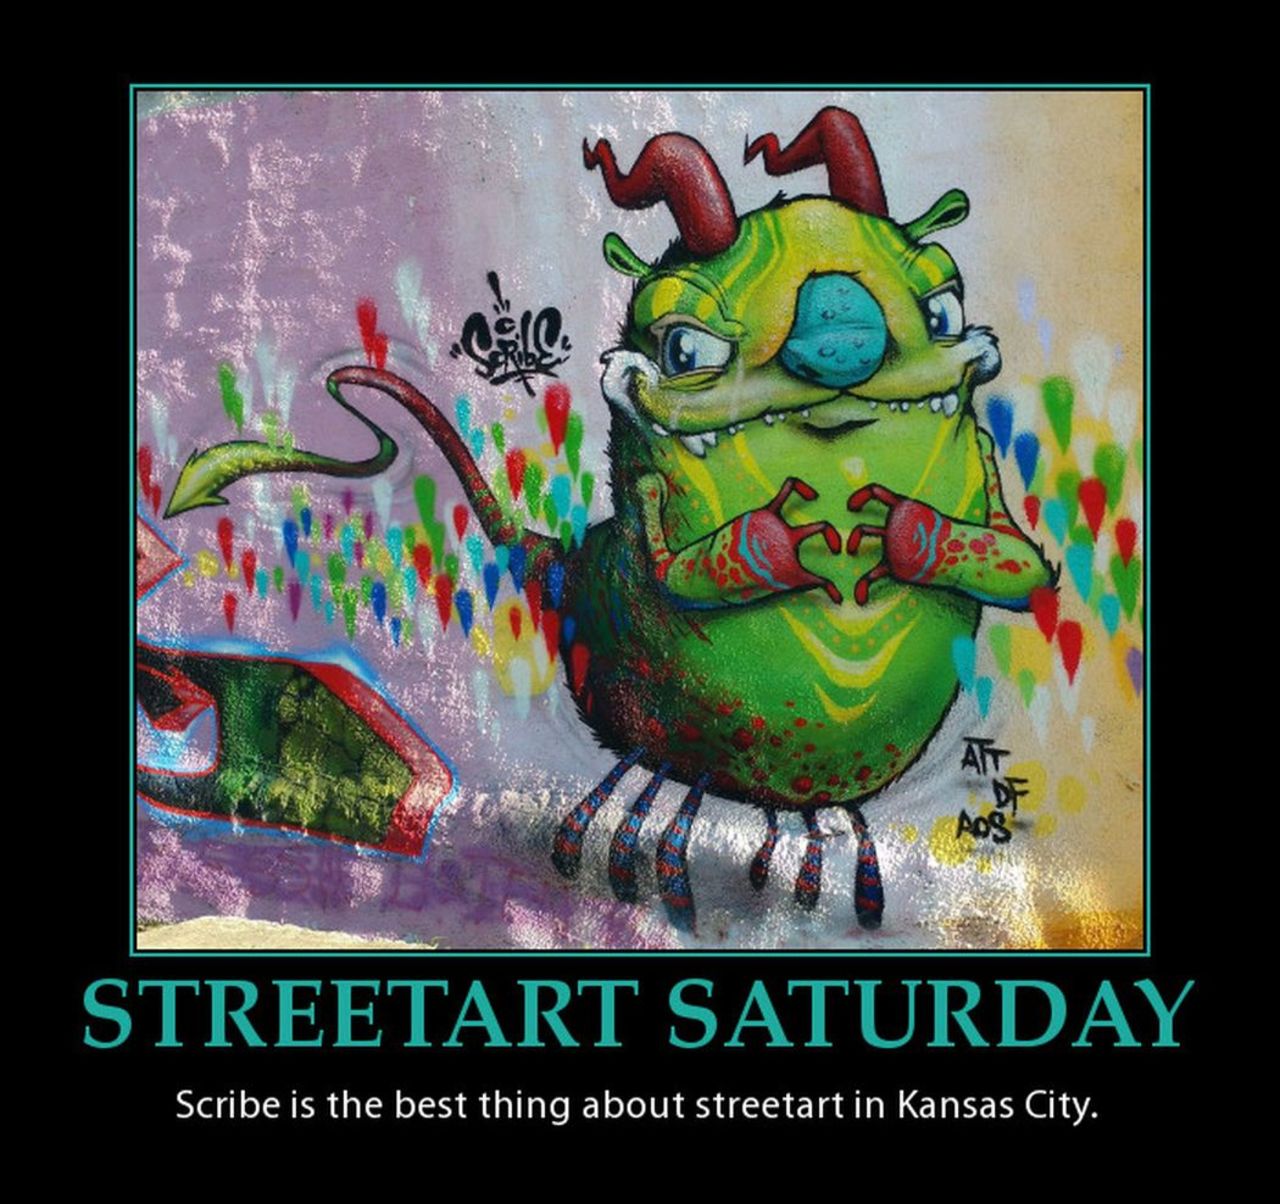 #StreetartSaturday Whenever I drop by #KansasCity I'm always looking for great #StreetArt especially art by Scribe. https://t.co/kmlzodhhip